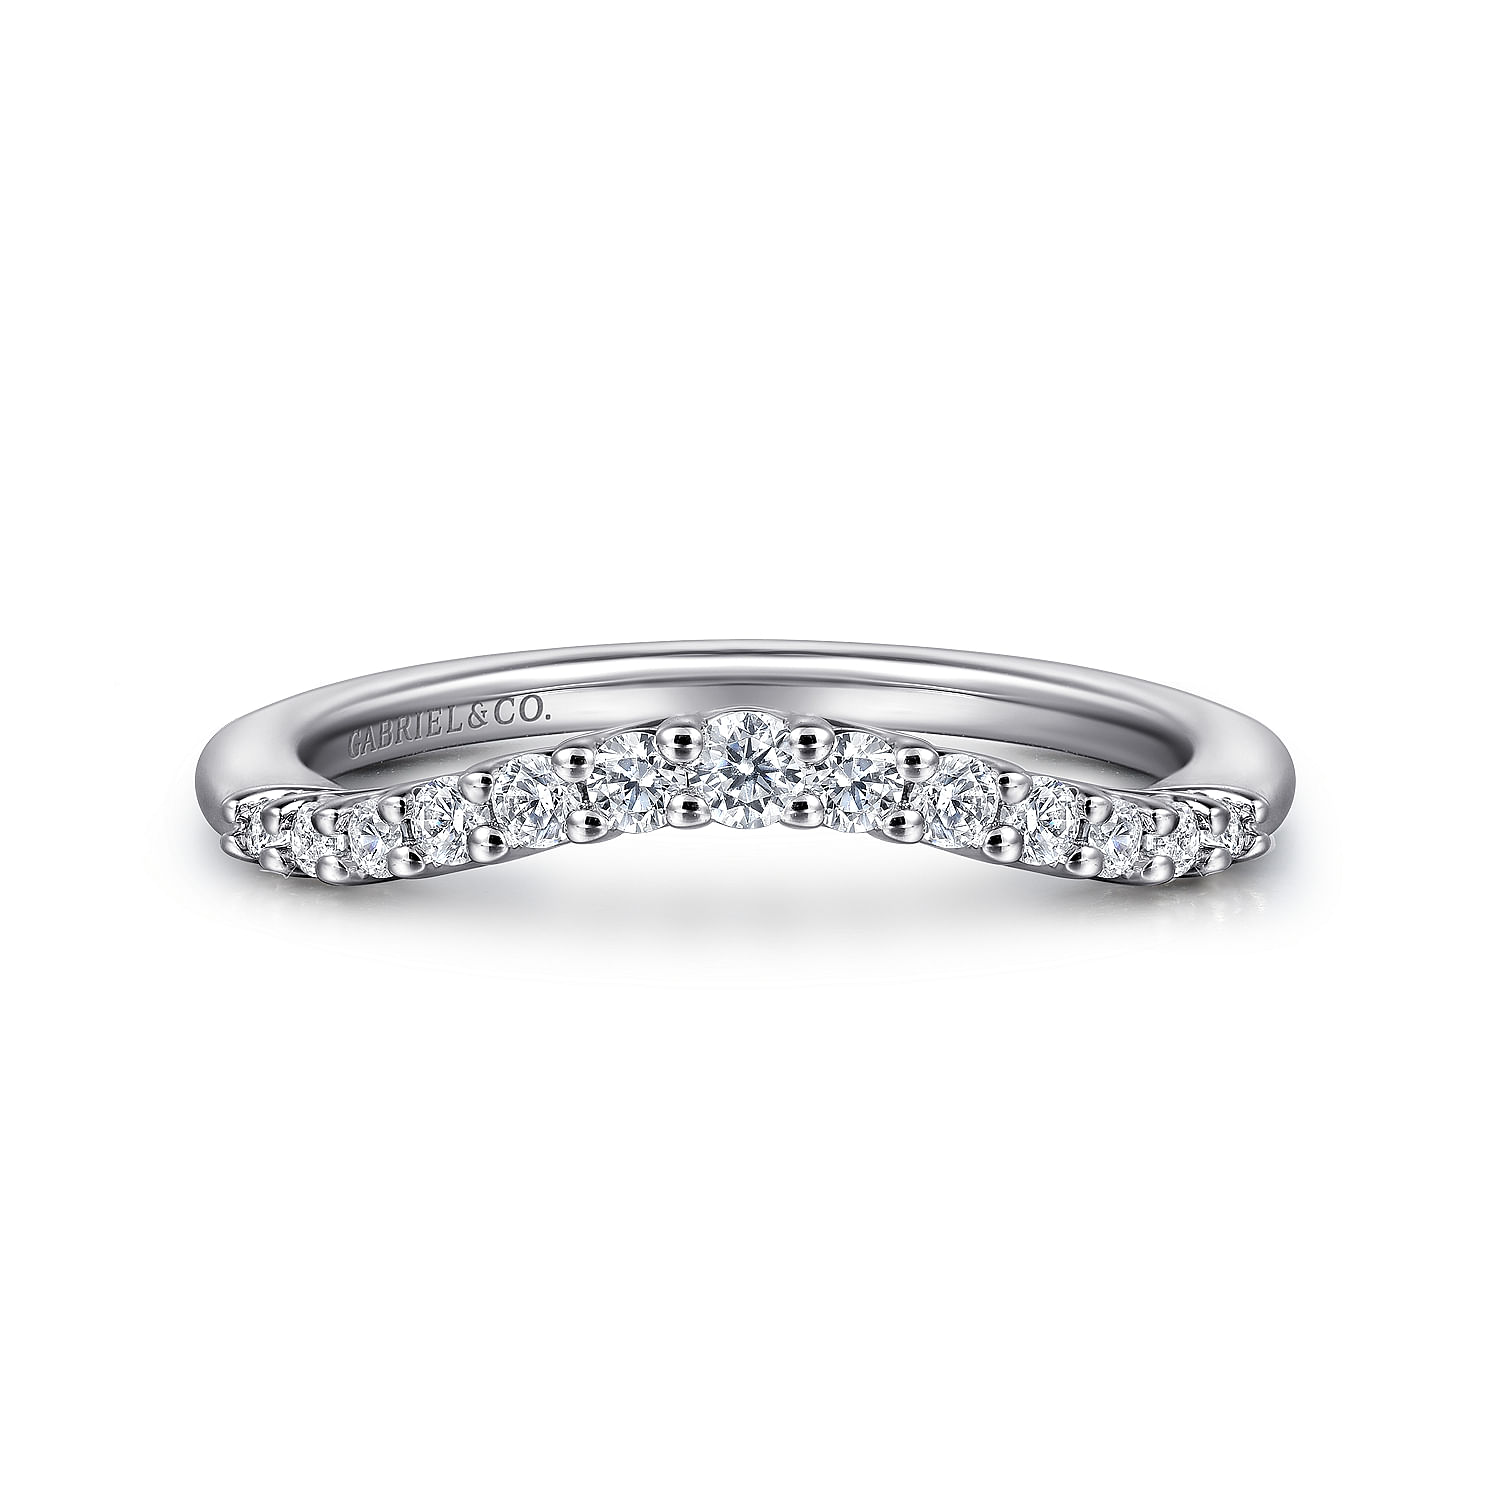 Toulon - Curved 14K White Gold Shared Prong Diamond Wedding Band